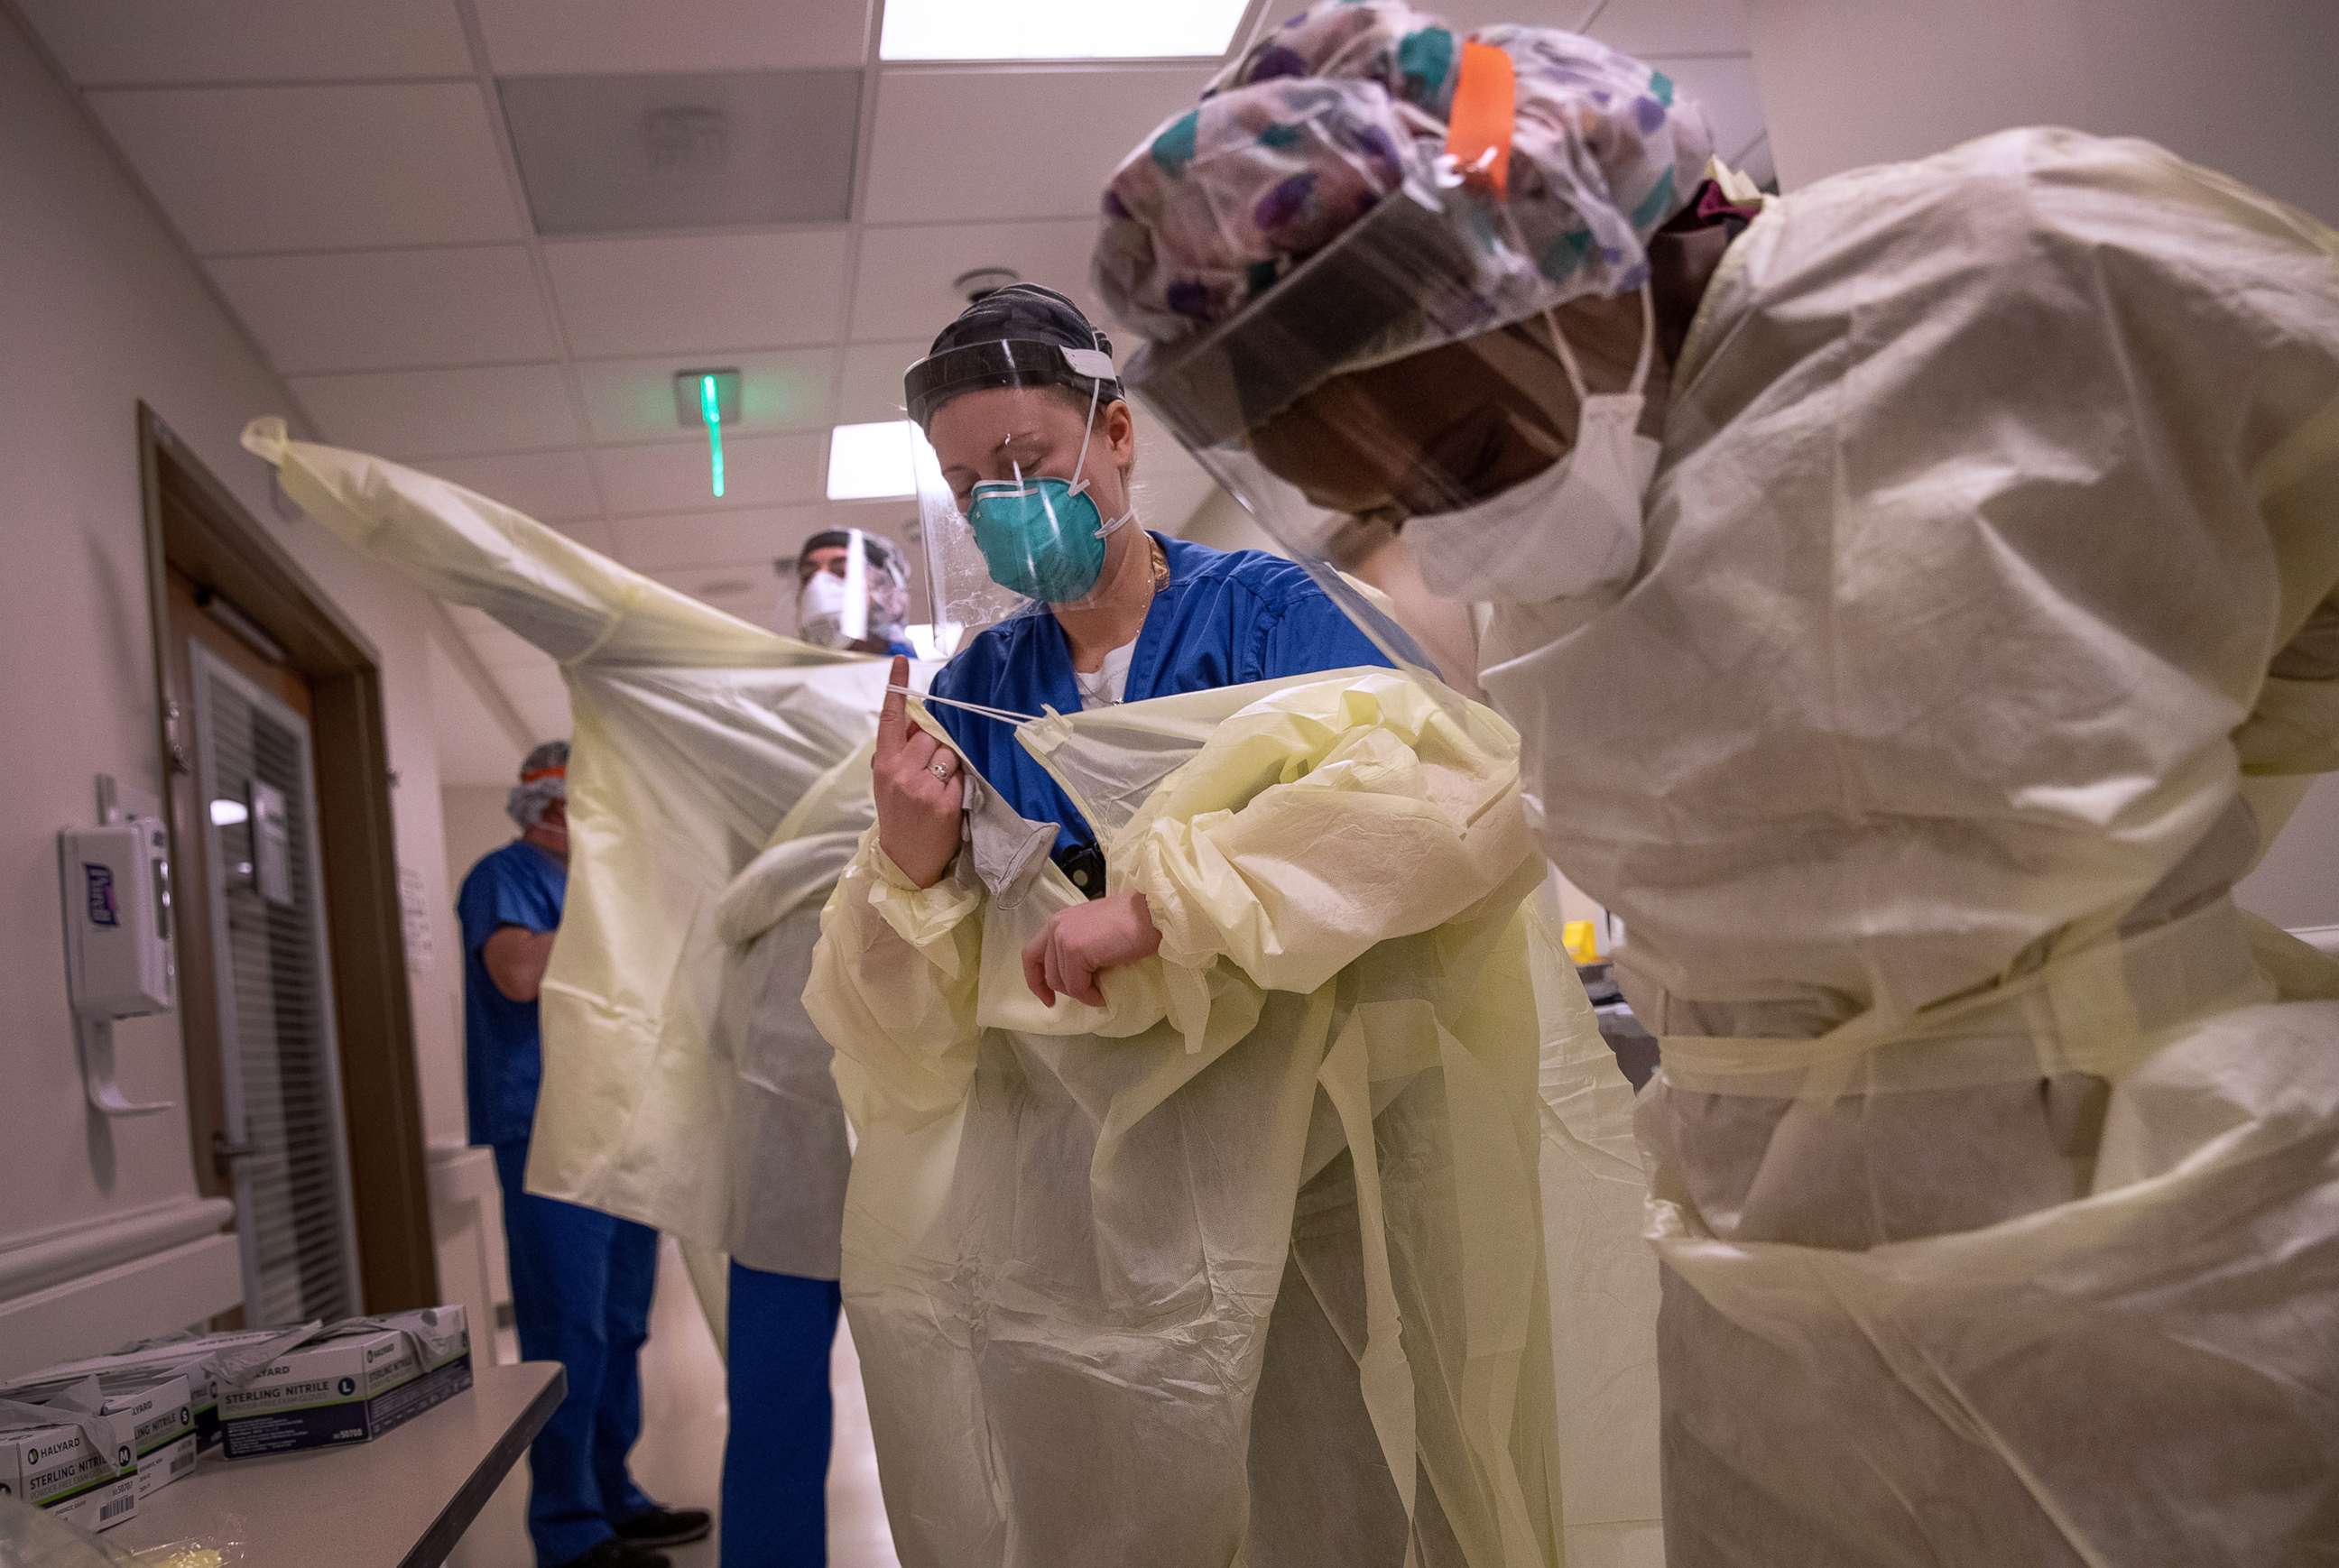 PHOTO: Medical workers don personal protective equipment before entering the room of a patient with COVID-19 in a Stamford Hospital intensive care unit, on April 24, 2020, in Stamford, Conn.